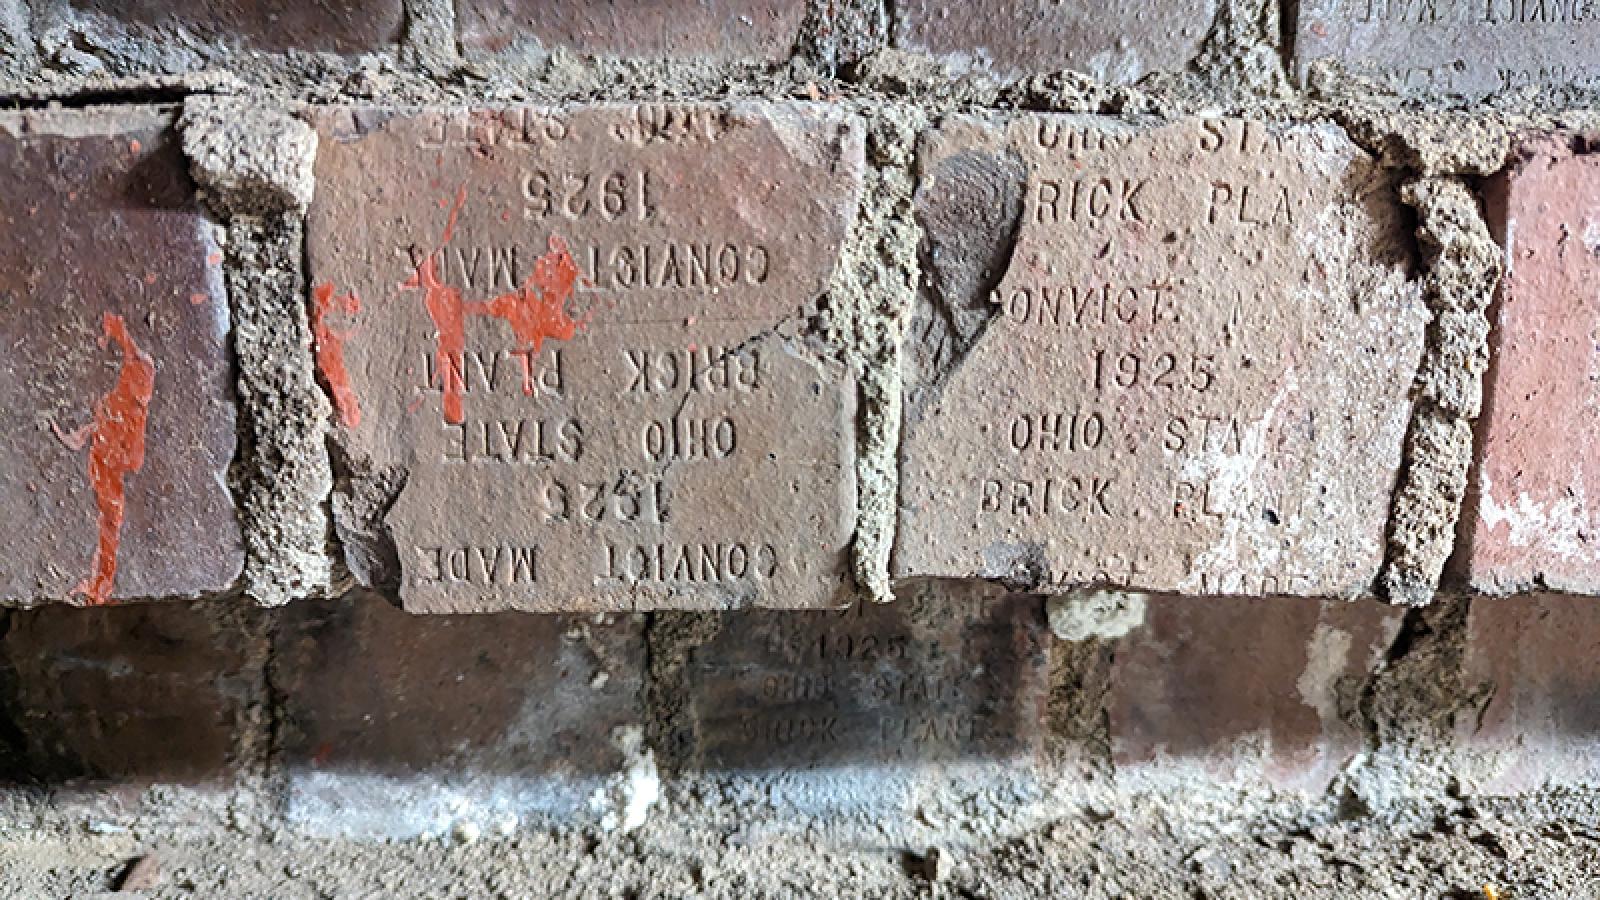 Convict-made bricks form many of the old tunnels crossing campus